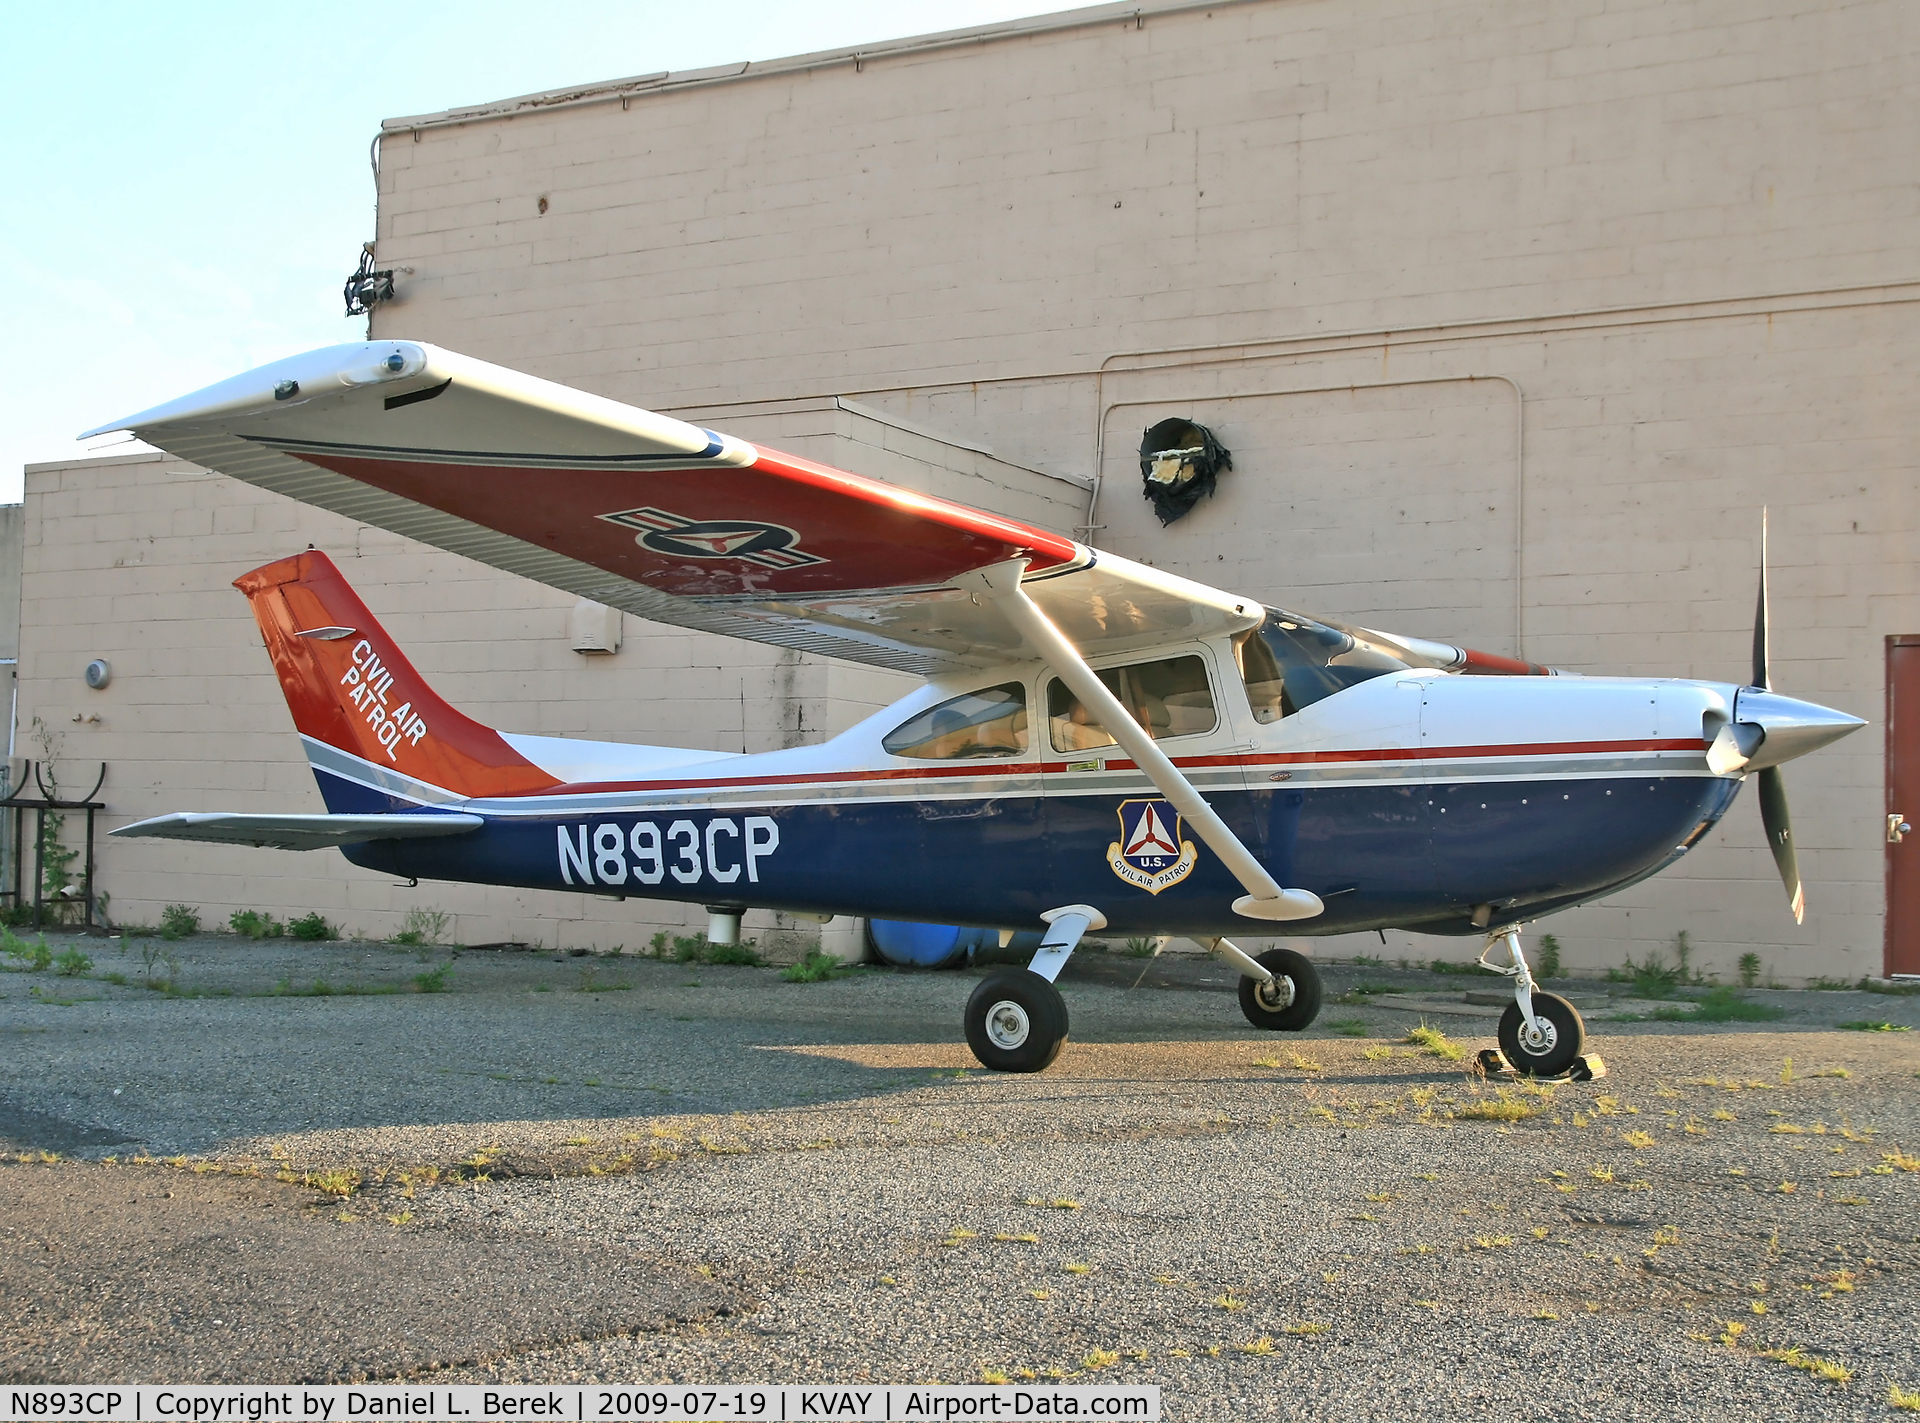 N893CP, 2006 Cessna 182T Skylane C/N 18281863, One of several CAP aircraft stationed at South Jersey Regional Airport that day.